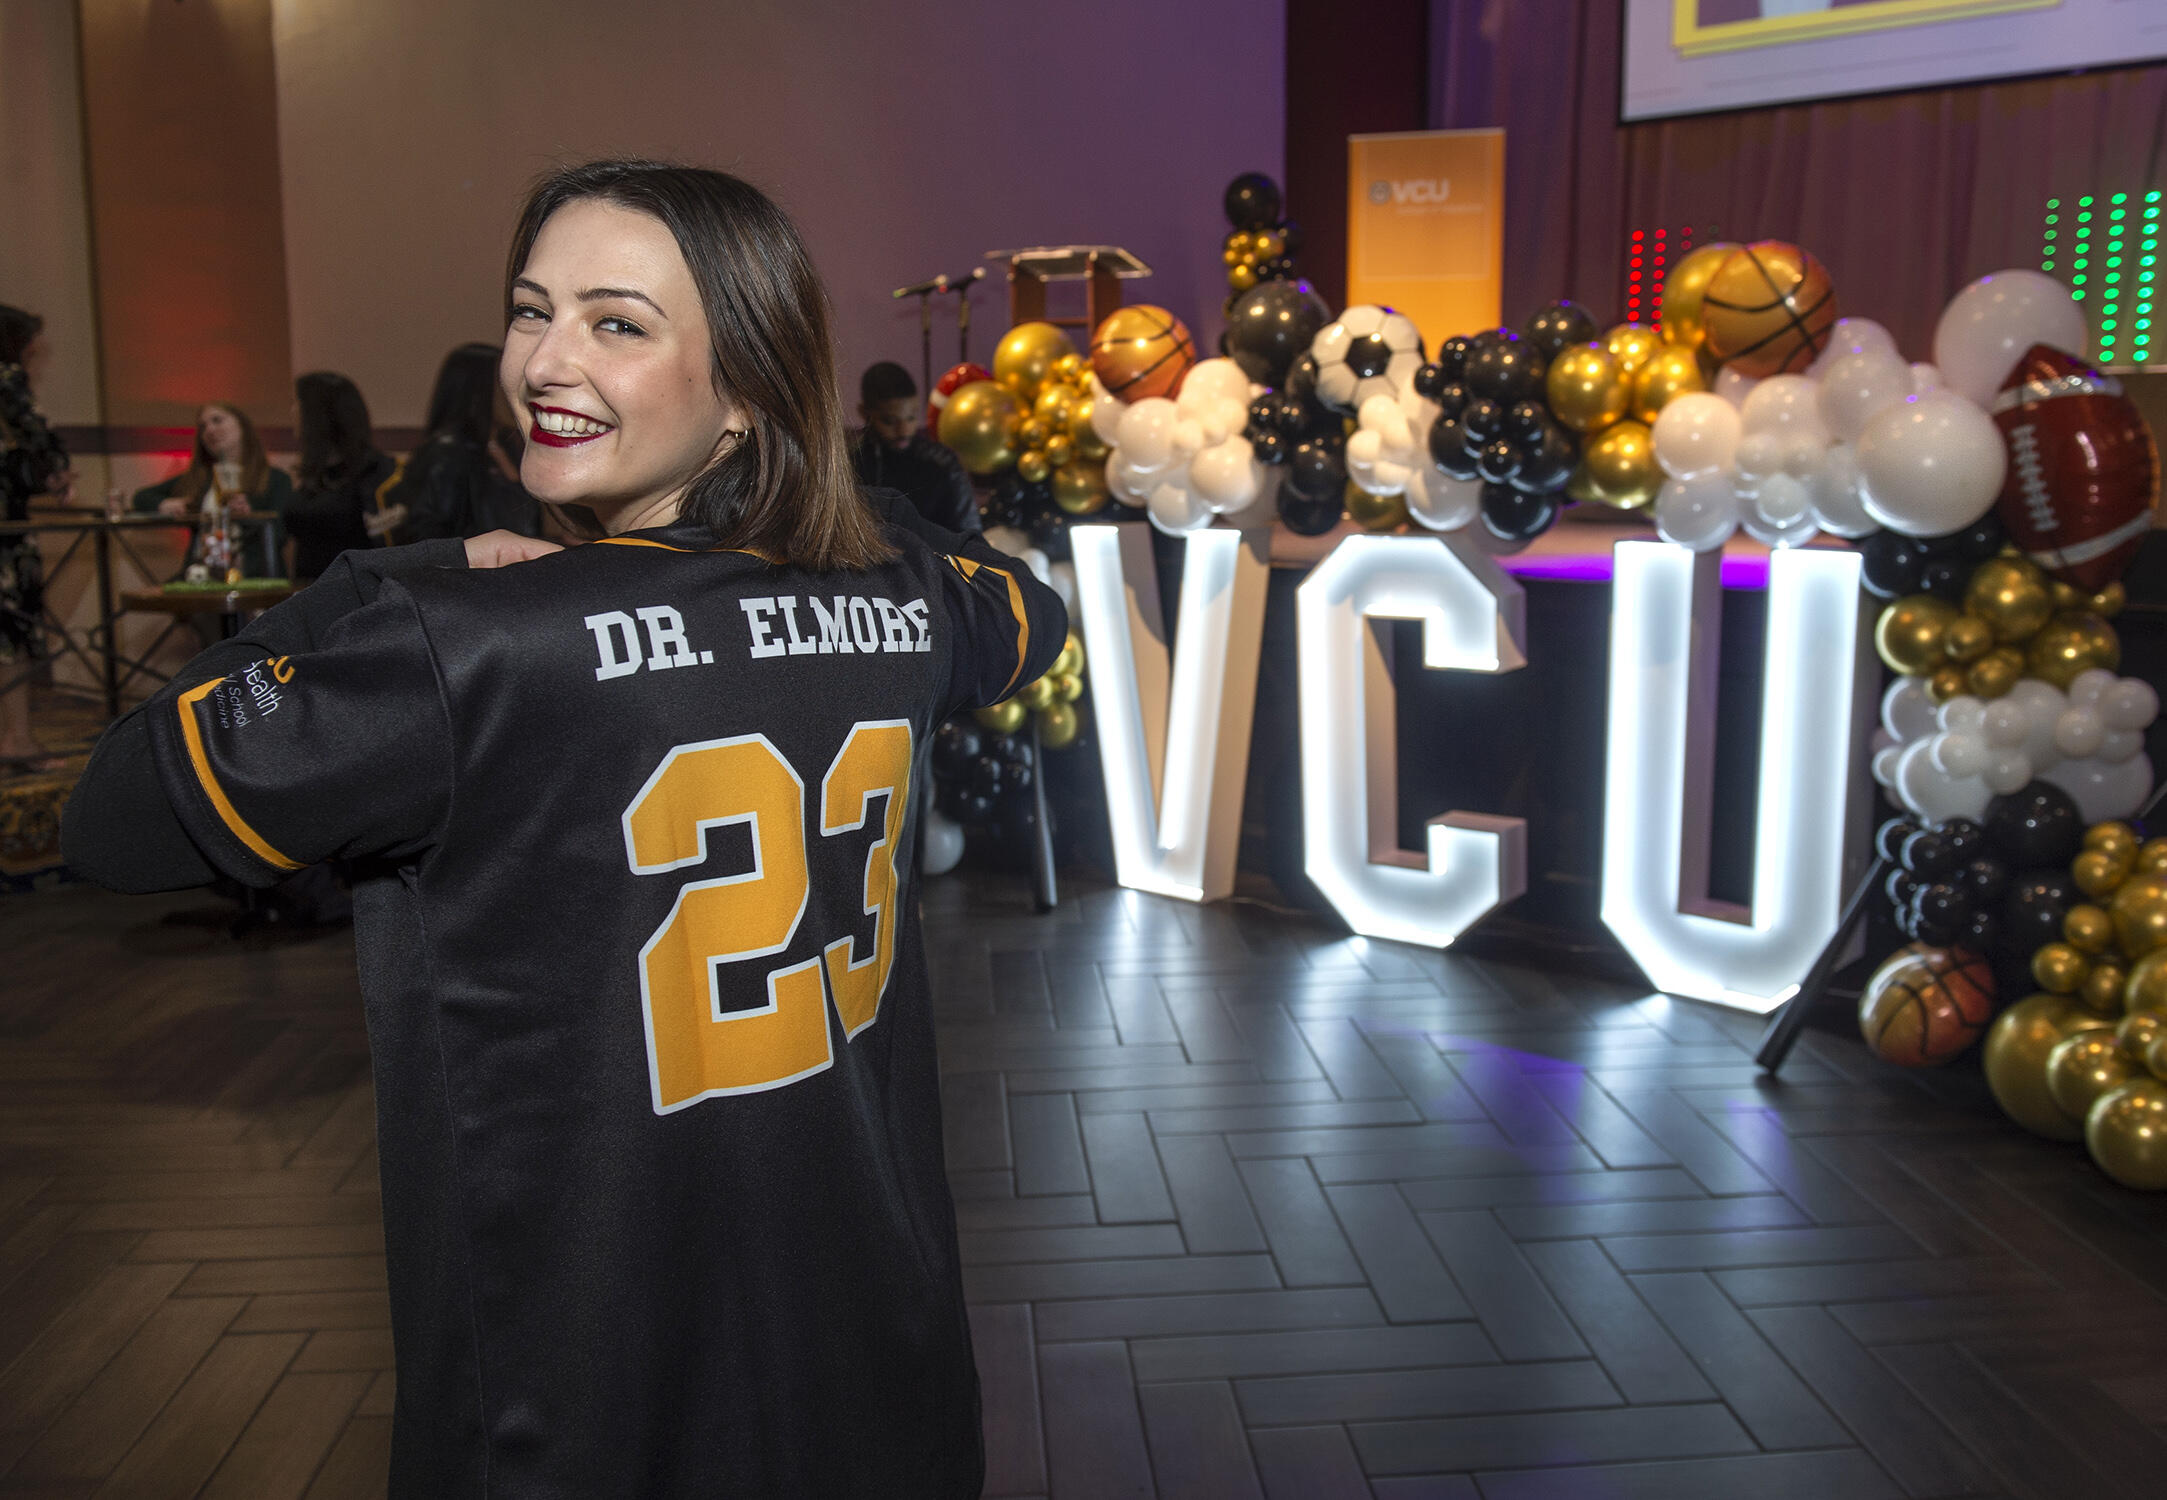 A woman looking behind her wearing a sports jersey that says \"DR. ELMORE 23\". To the woman's right are large white light up letters that spell out \"V C U.\" 